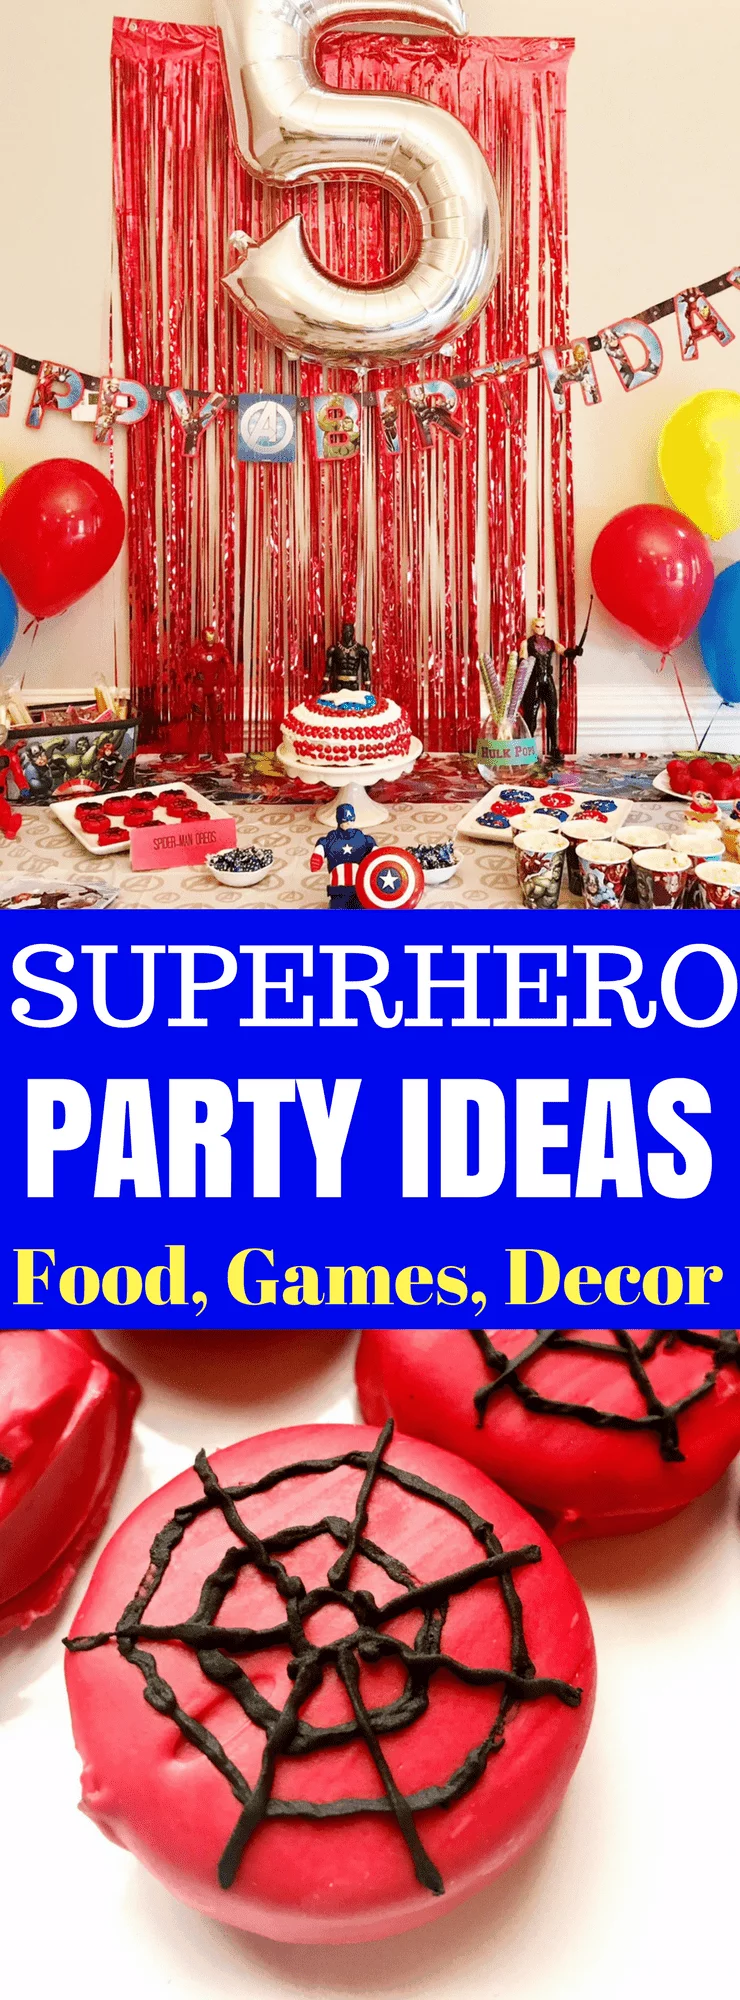 Check out these Superhero Party Ideas - perfect for birthday parties, kids parties, Halloween parties and more for your favorite superhero and Avengers fans! I've got a Captain America cake, Spider-Man Oreos, and Avengers party games!